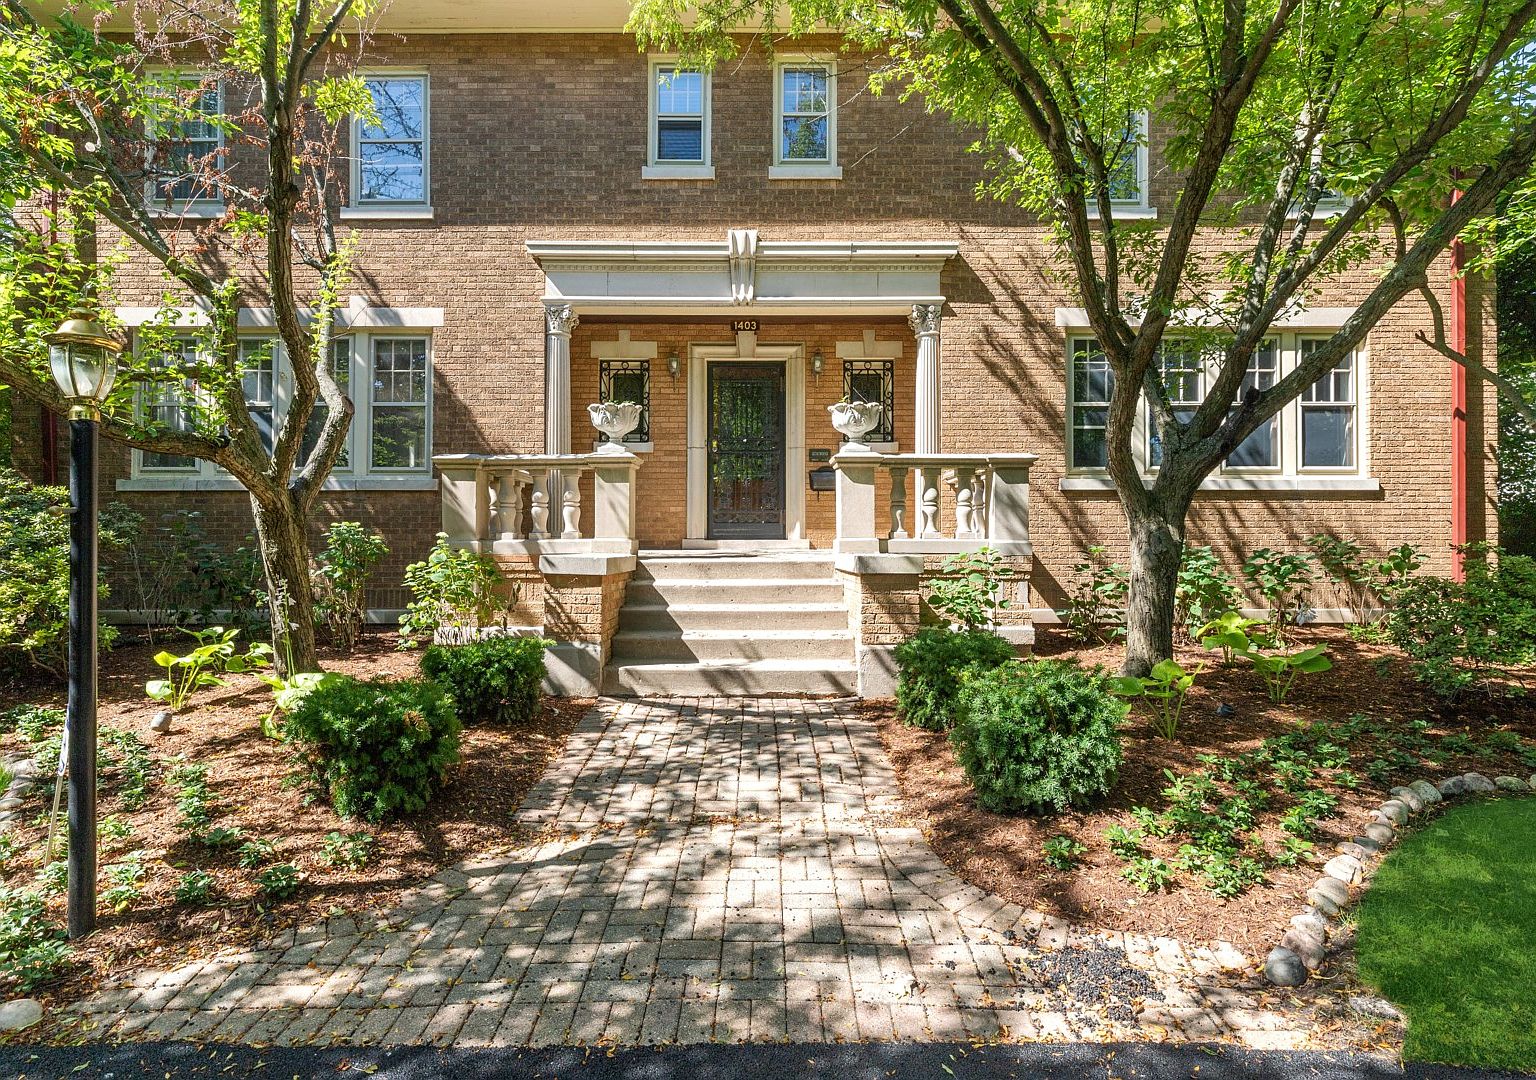 1403 Glenview Rd, Glenview, IL 60025 | Zillow